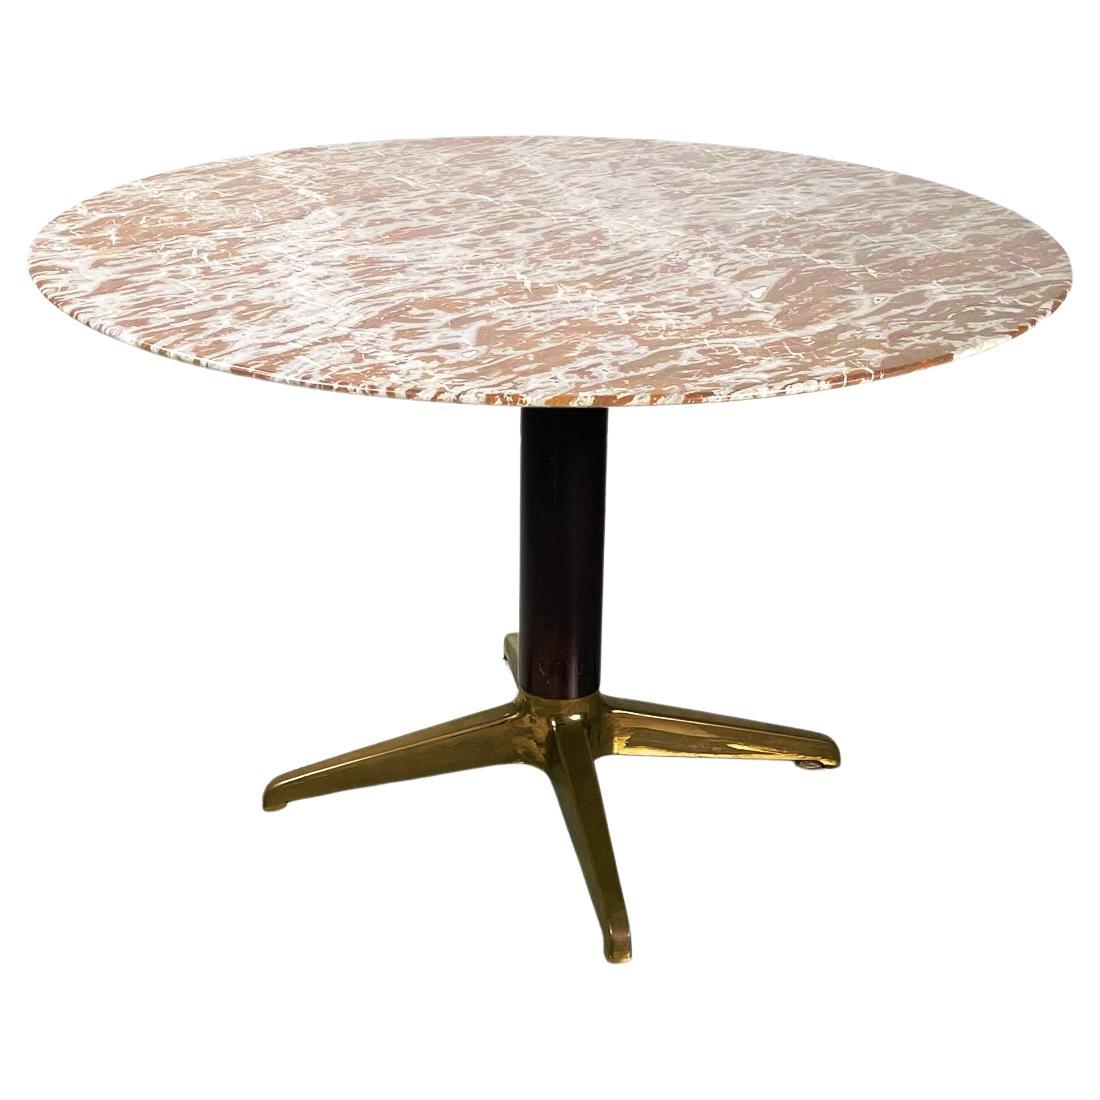 Italian Midcentury Round Dining Table in Red Marble, Black Wood and Brass, 1950s